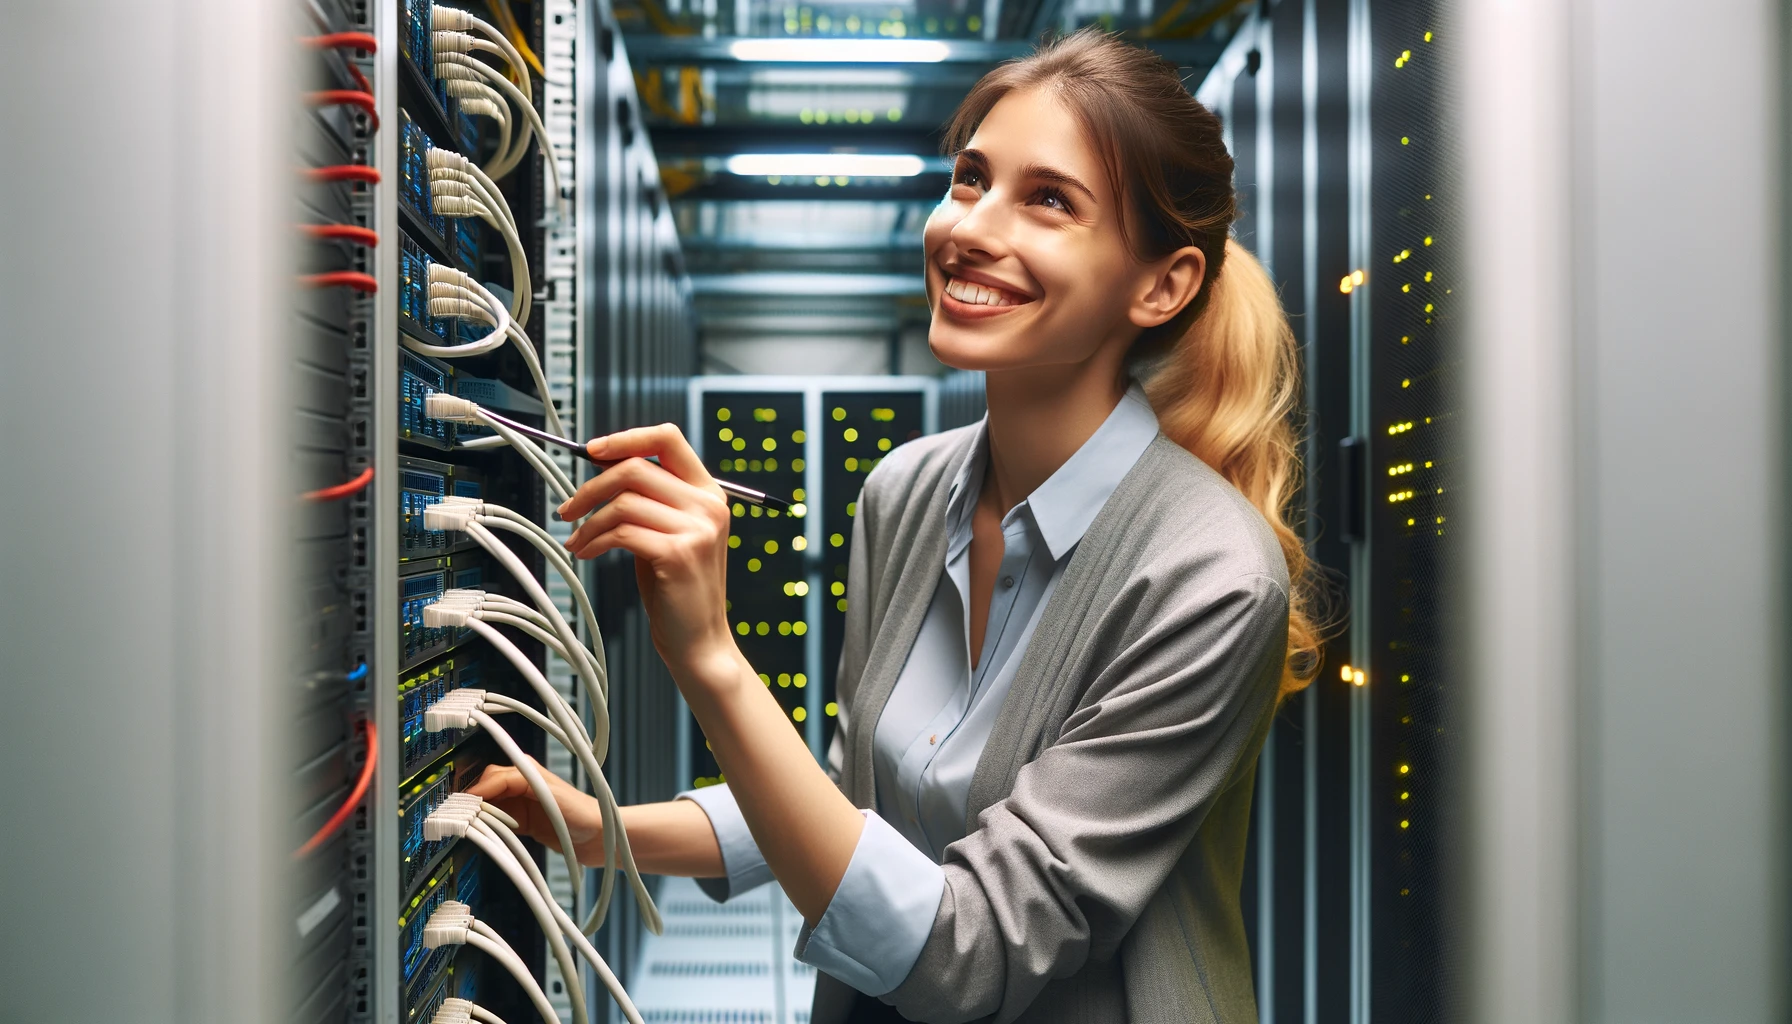 Happy Woman Working On A Server Rack In A Datacenter